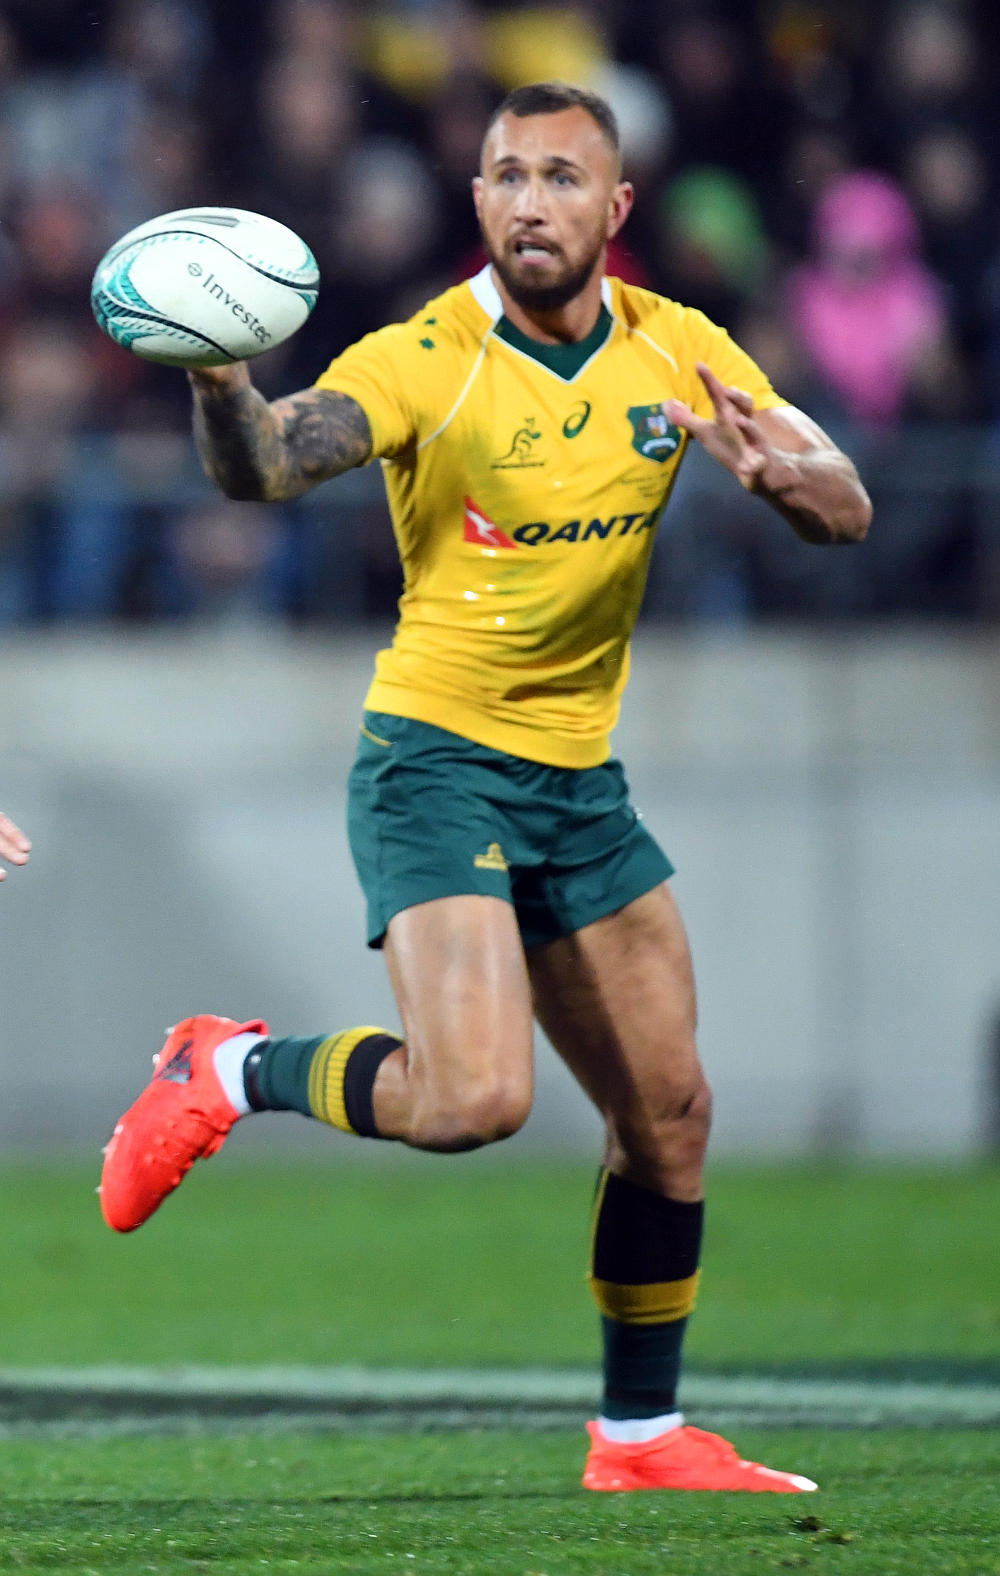 Quade Cooper Australia Rugby Union Wallabies Test Rugby Rugby Championship Bledisloe Cup 2016 tall